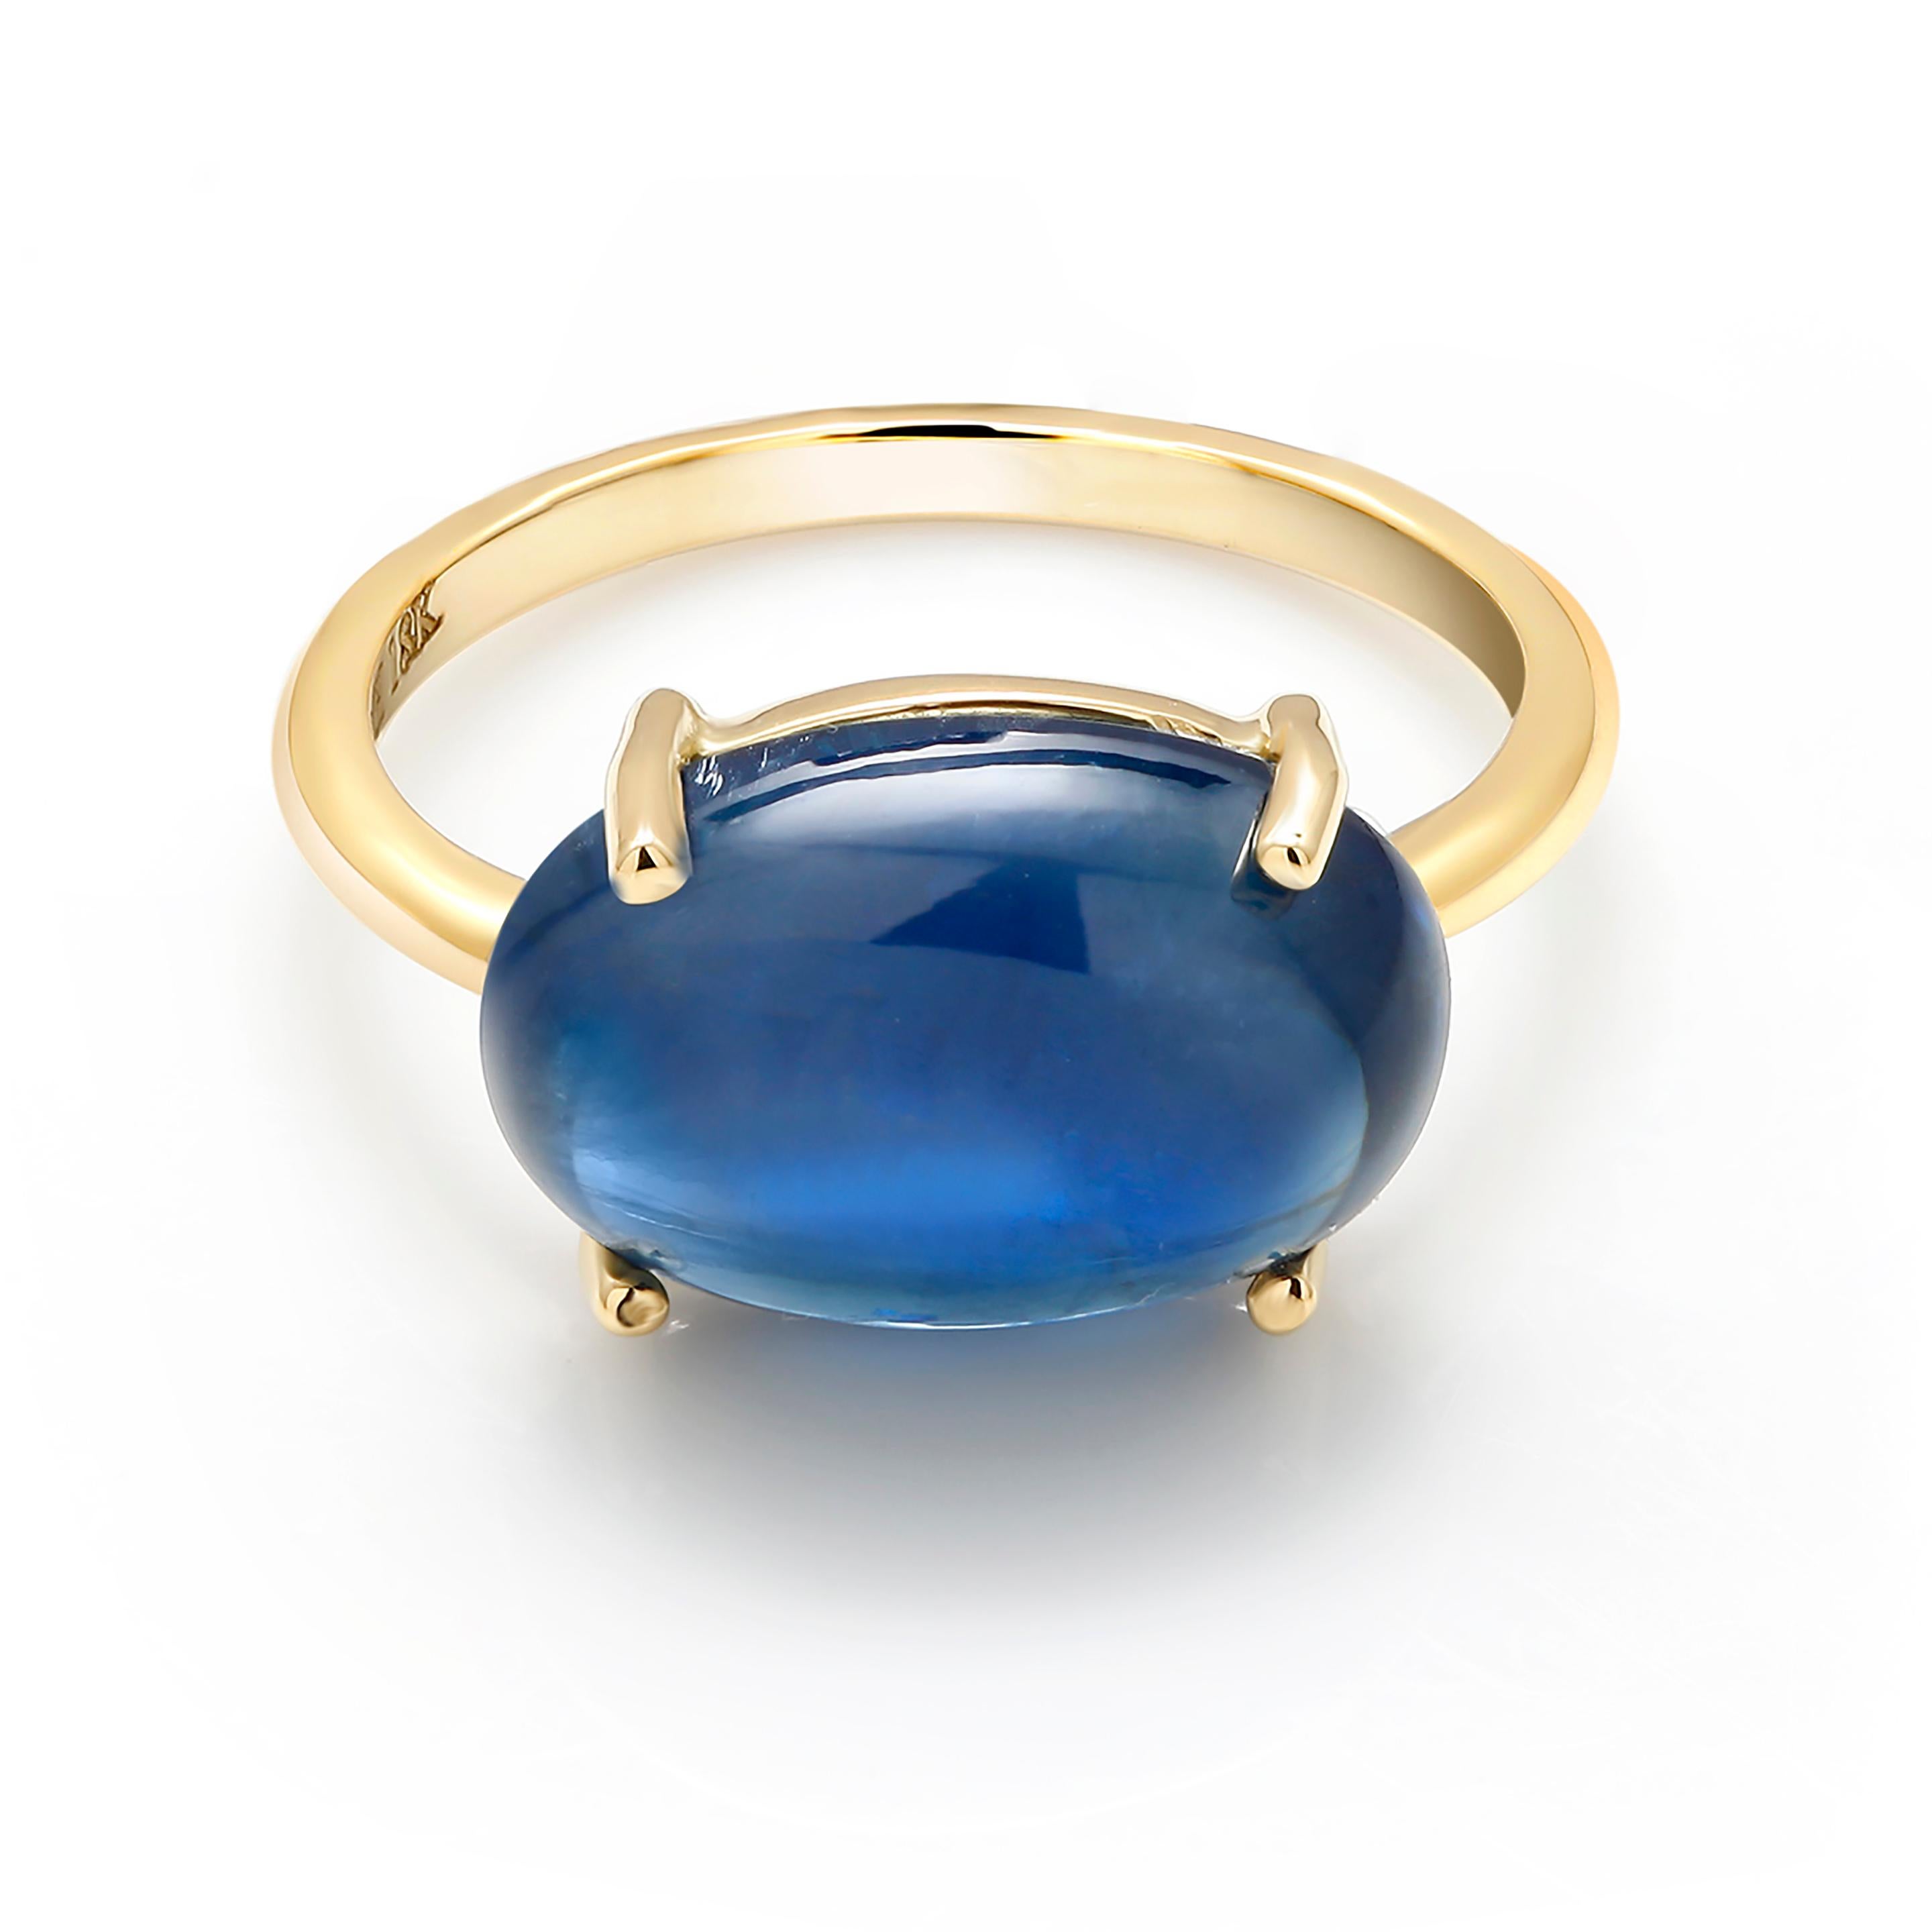 Eighteen karat yellow gold cocktail ring
Ceylon cabochon sapphire weighing  9.16 carat  
Sapphire measures 14x12 millimeter                                                                      
Ring size 5 In Stock
Ring can be resized 
New